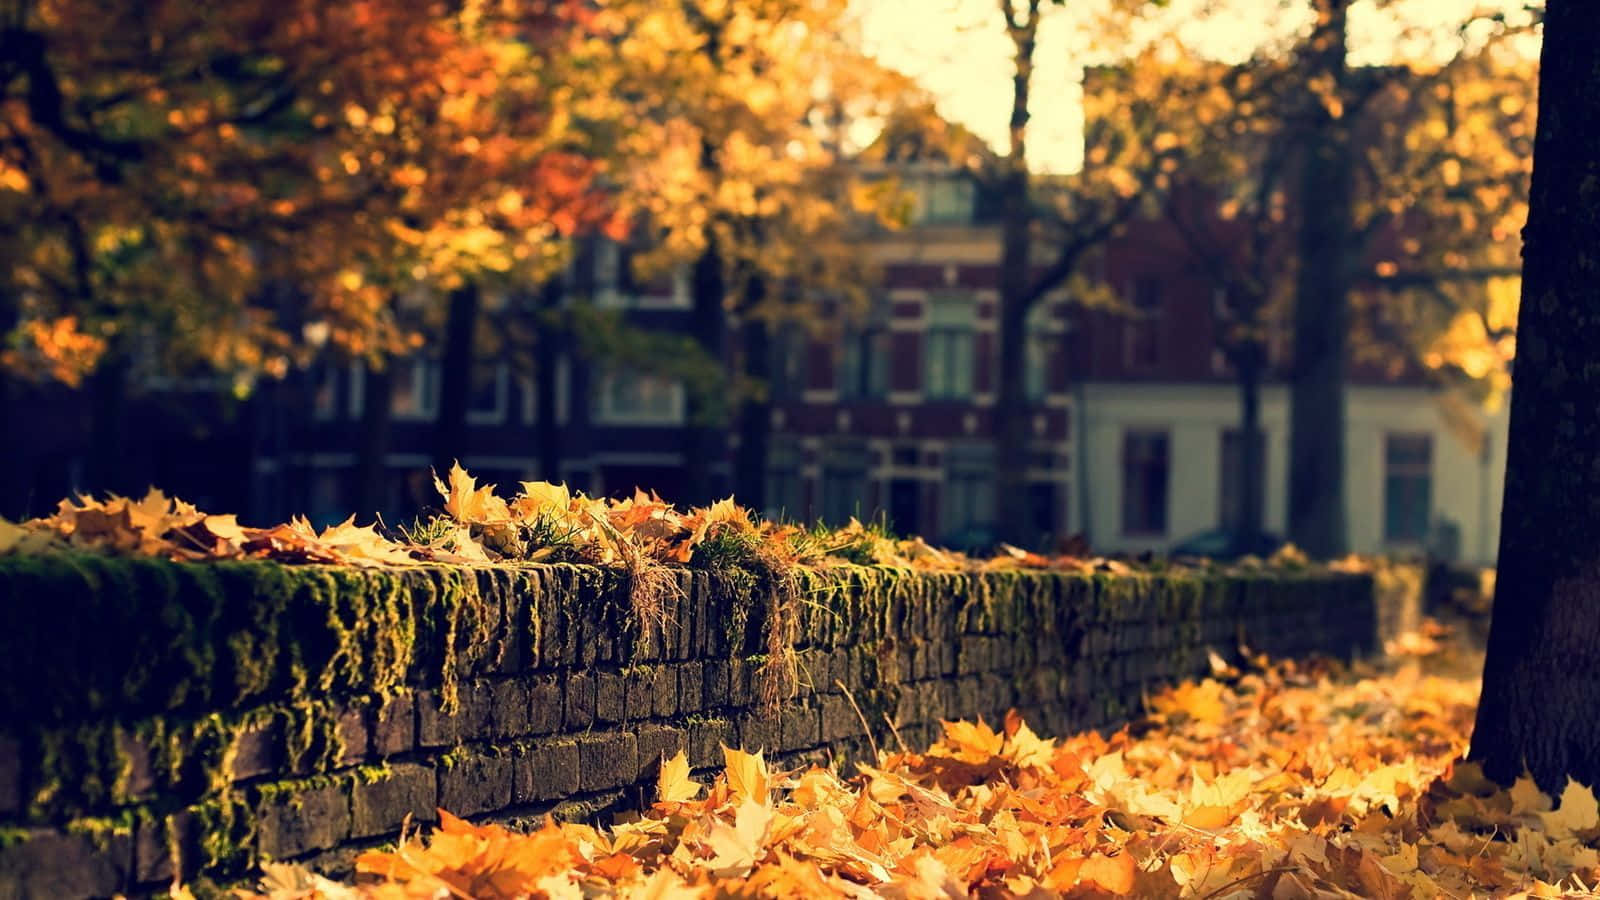 Autumn Leaves On A Brick Wall Wallpaper